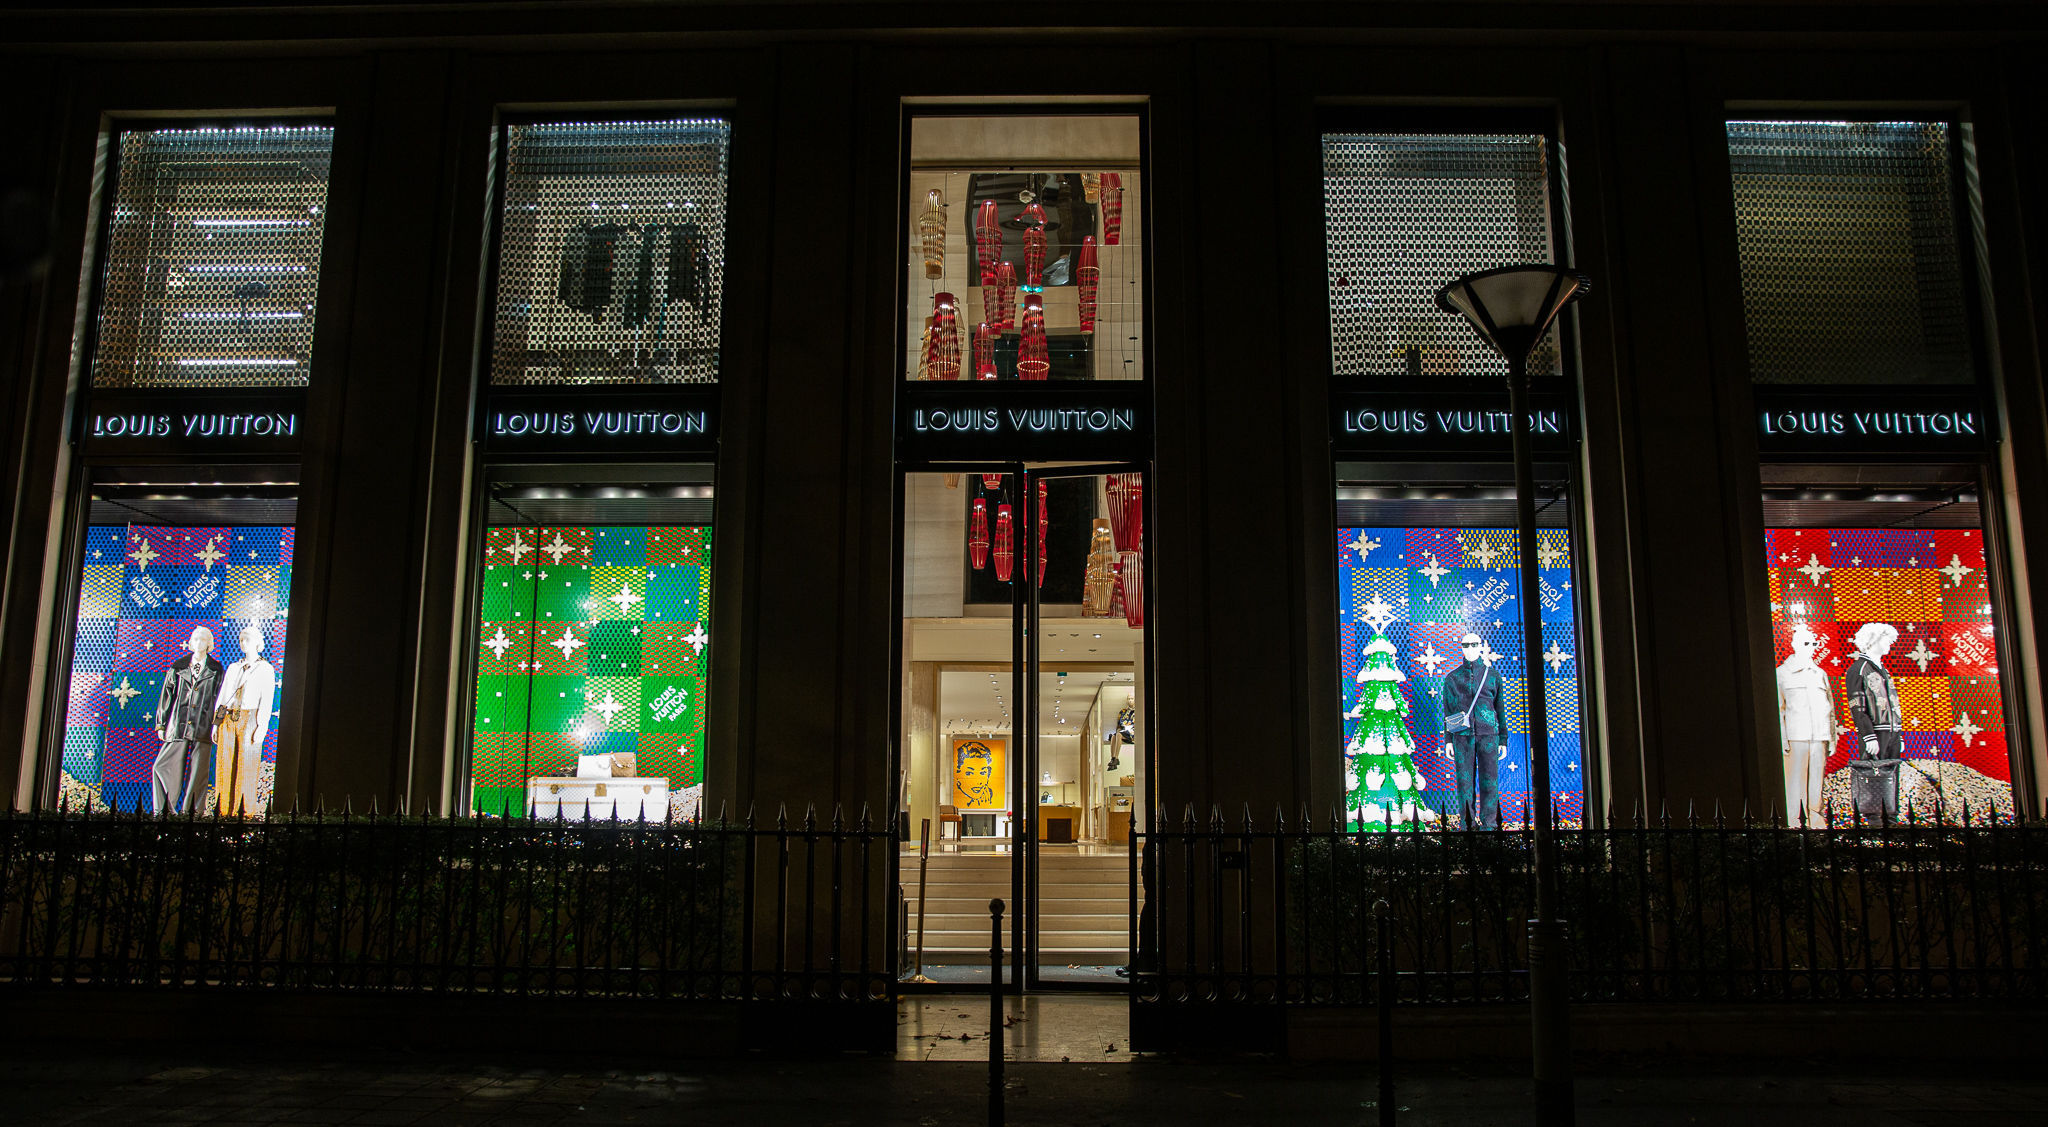 Louis Vuitton Partners With Lego on Holiday Window Displays – WWD